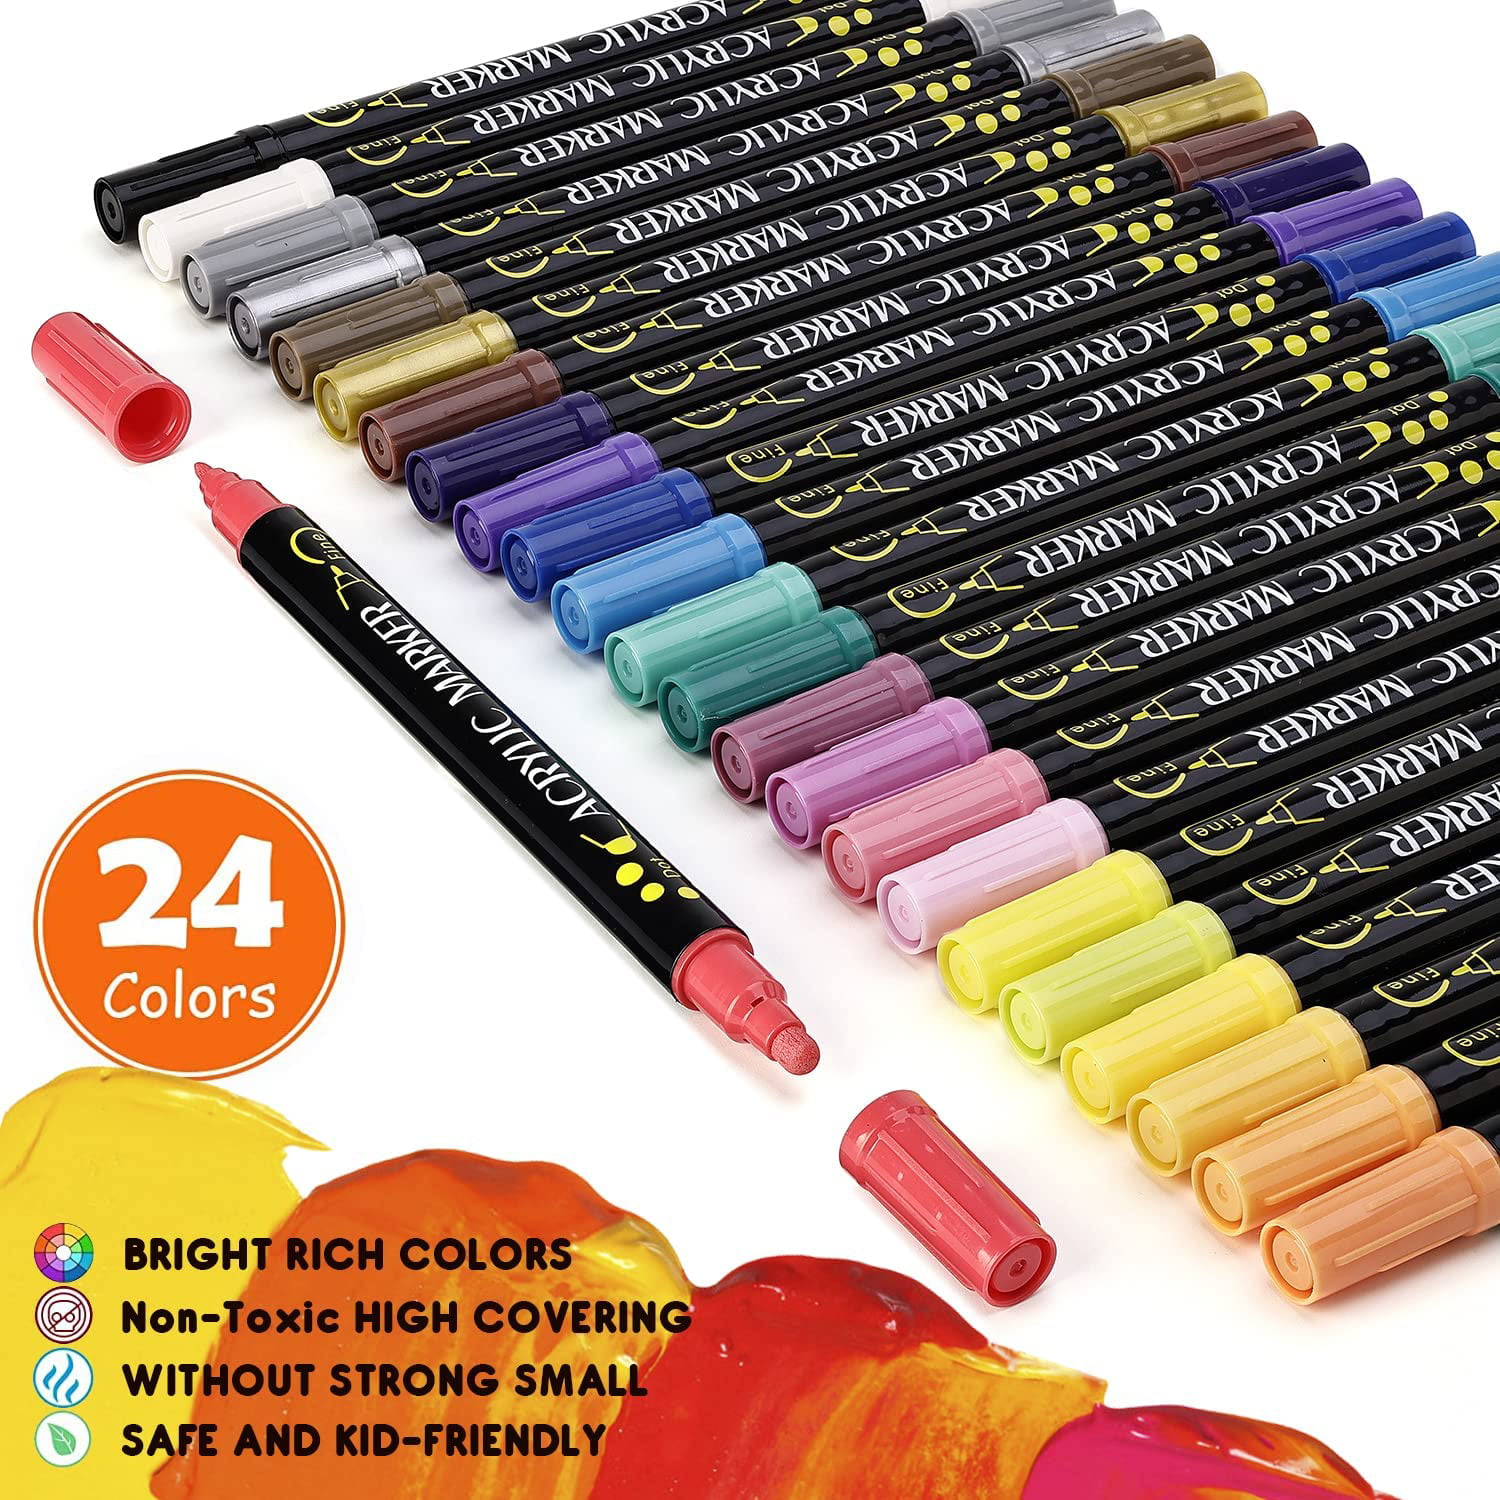 24 Colors Paint Markers Paint Pens, Dual Tip Acrylic Paint Pens, Ideal for  Wood, Rock Painting, Canvas, Stone, Glass, Ceramic, DIY Crafts Making Art  Supplies 